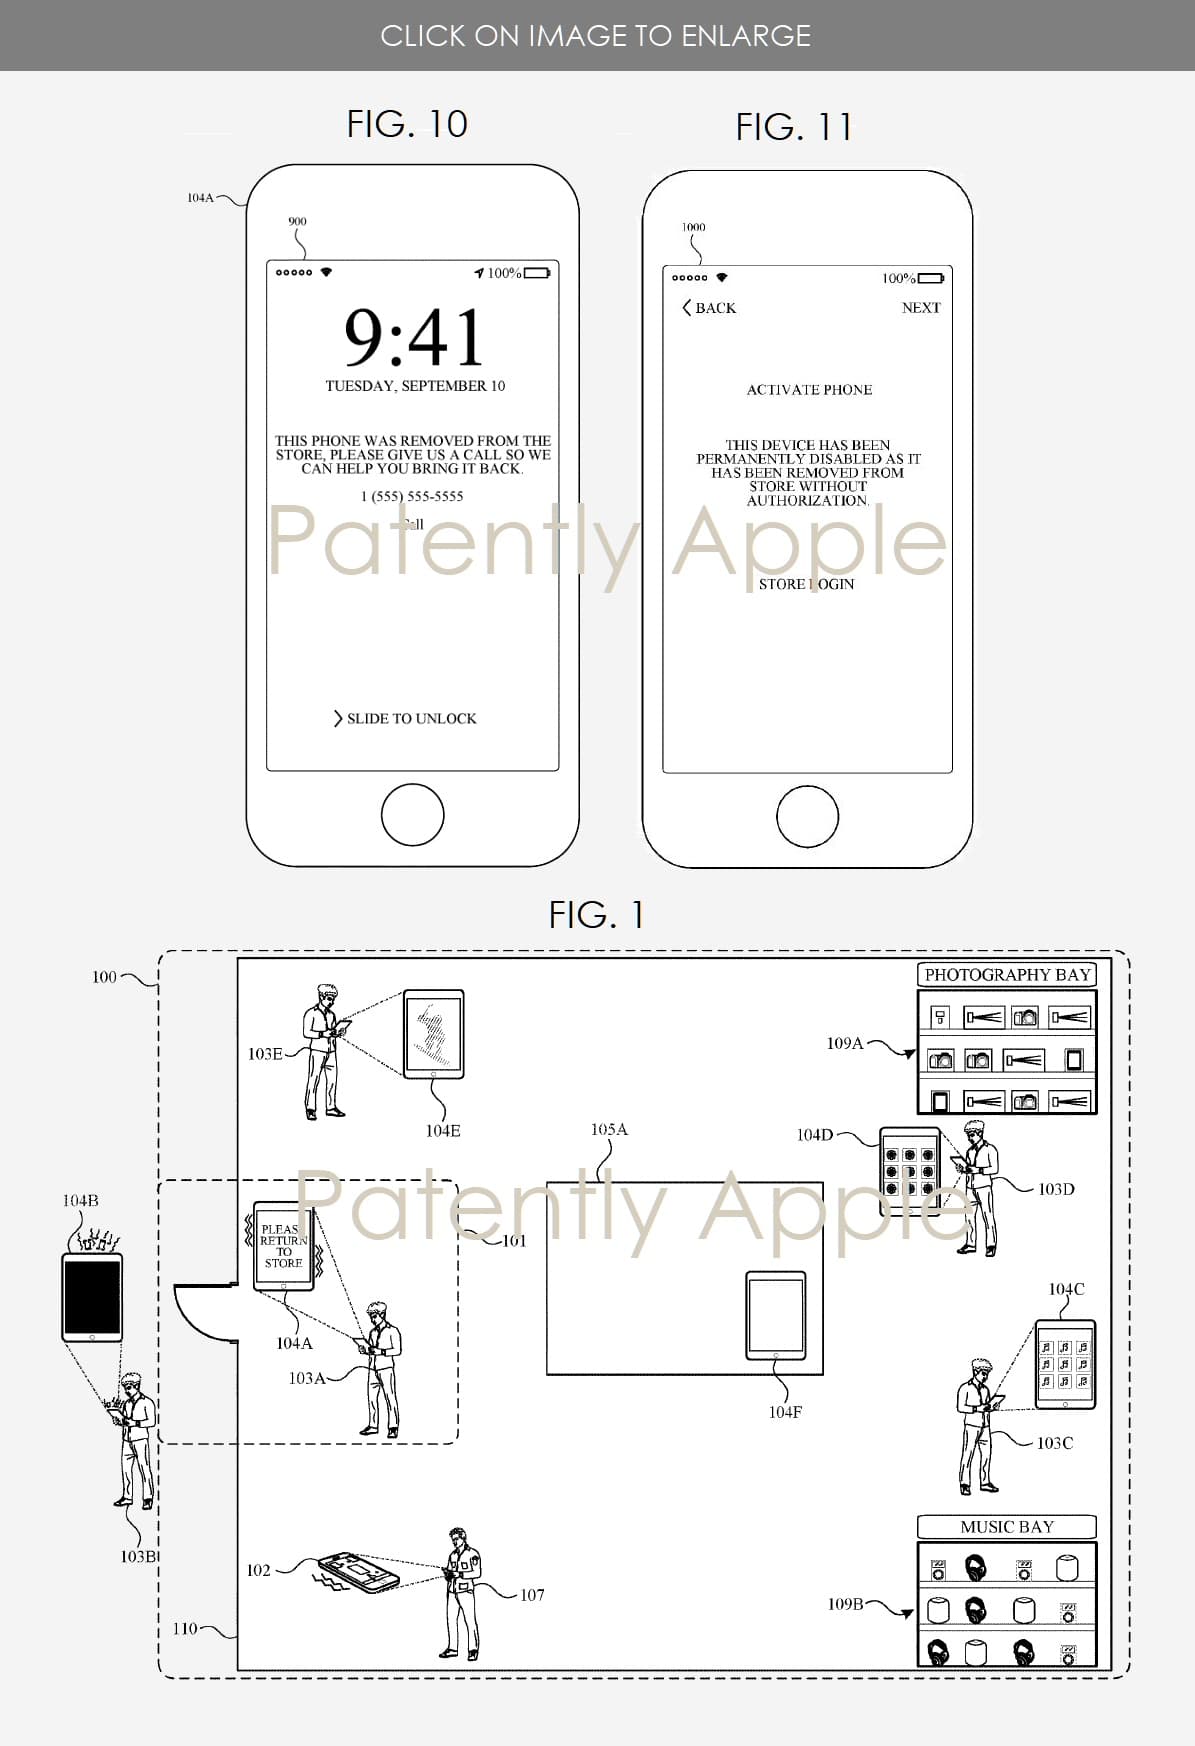 Apple patent application showing a wireless security system